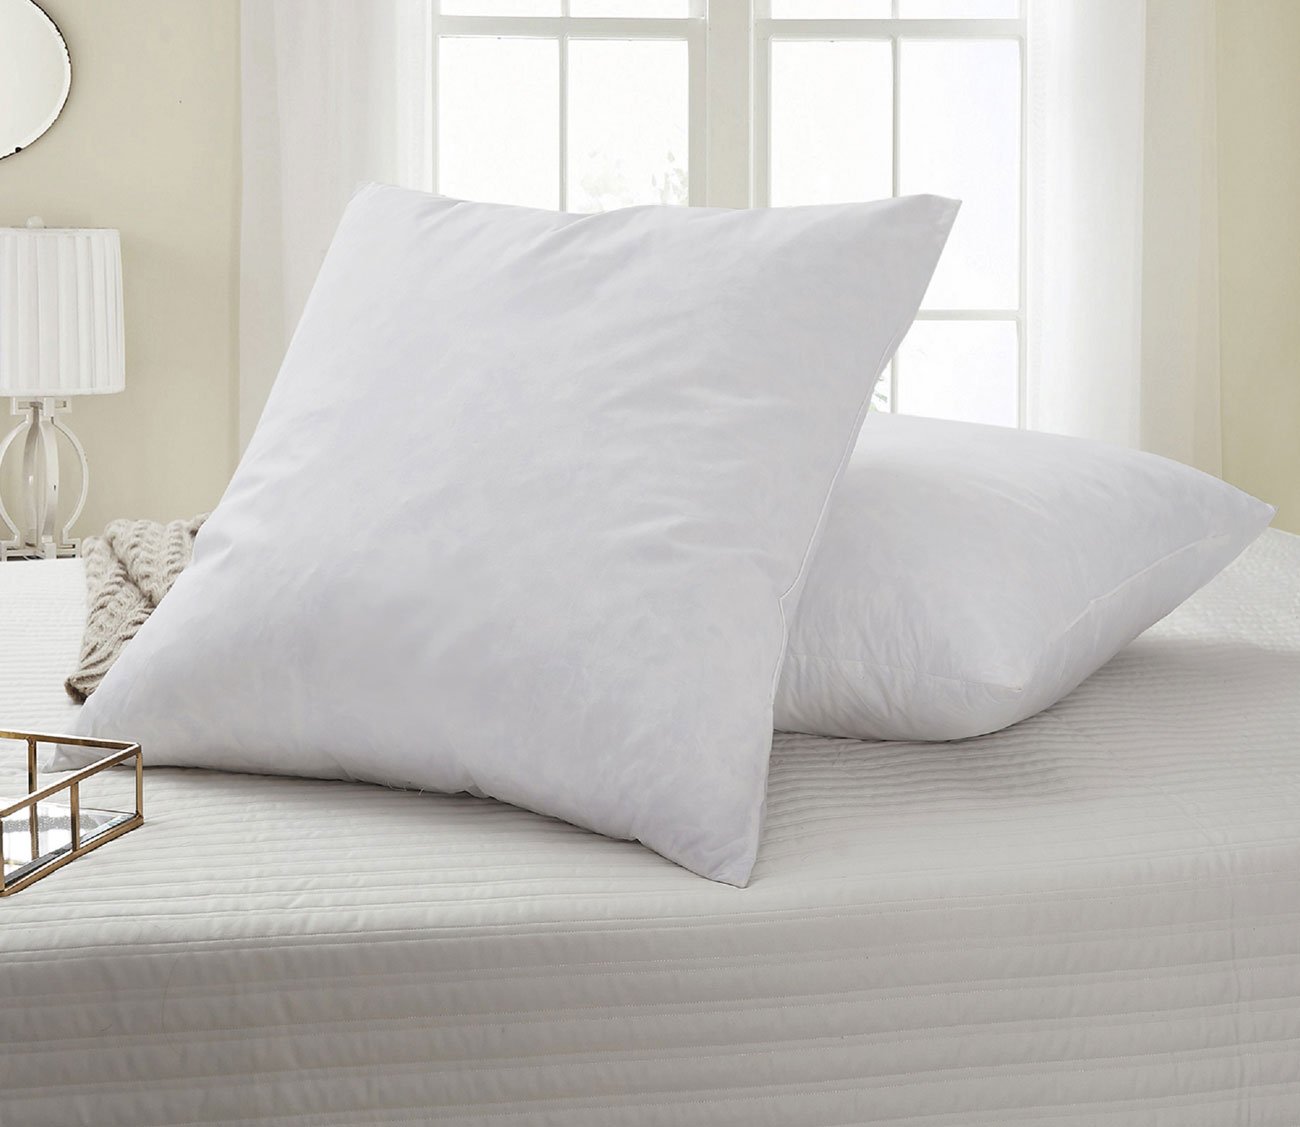 https://cdn.shopify.com/s/files/1/2420/9425/products/feather-euro-square-pillow-2-pack-by-serta-552086.jpg?v=1638474221